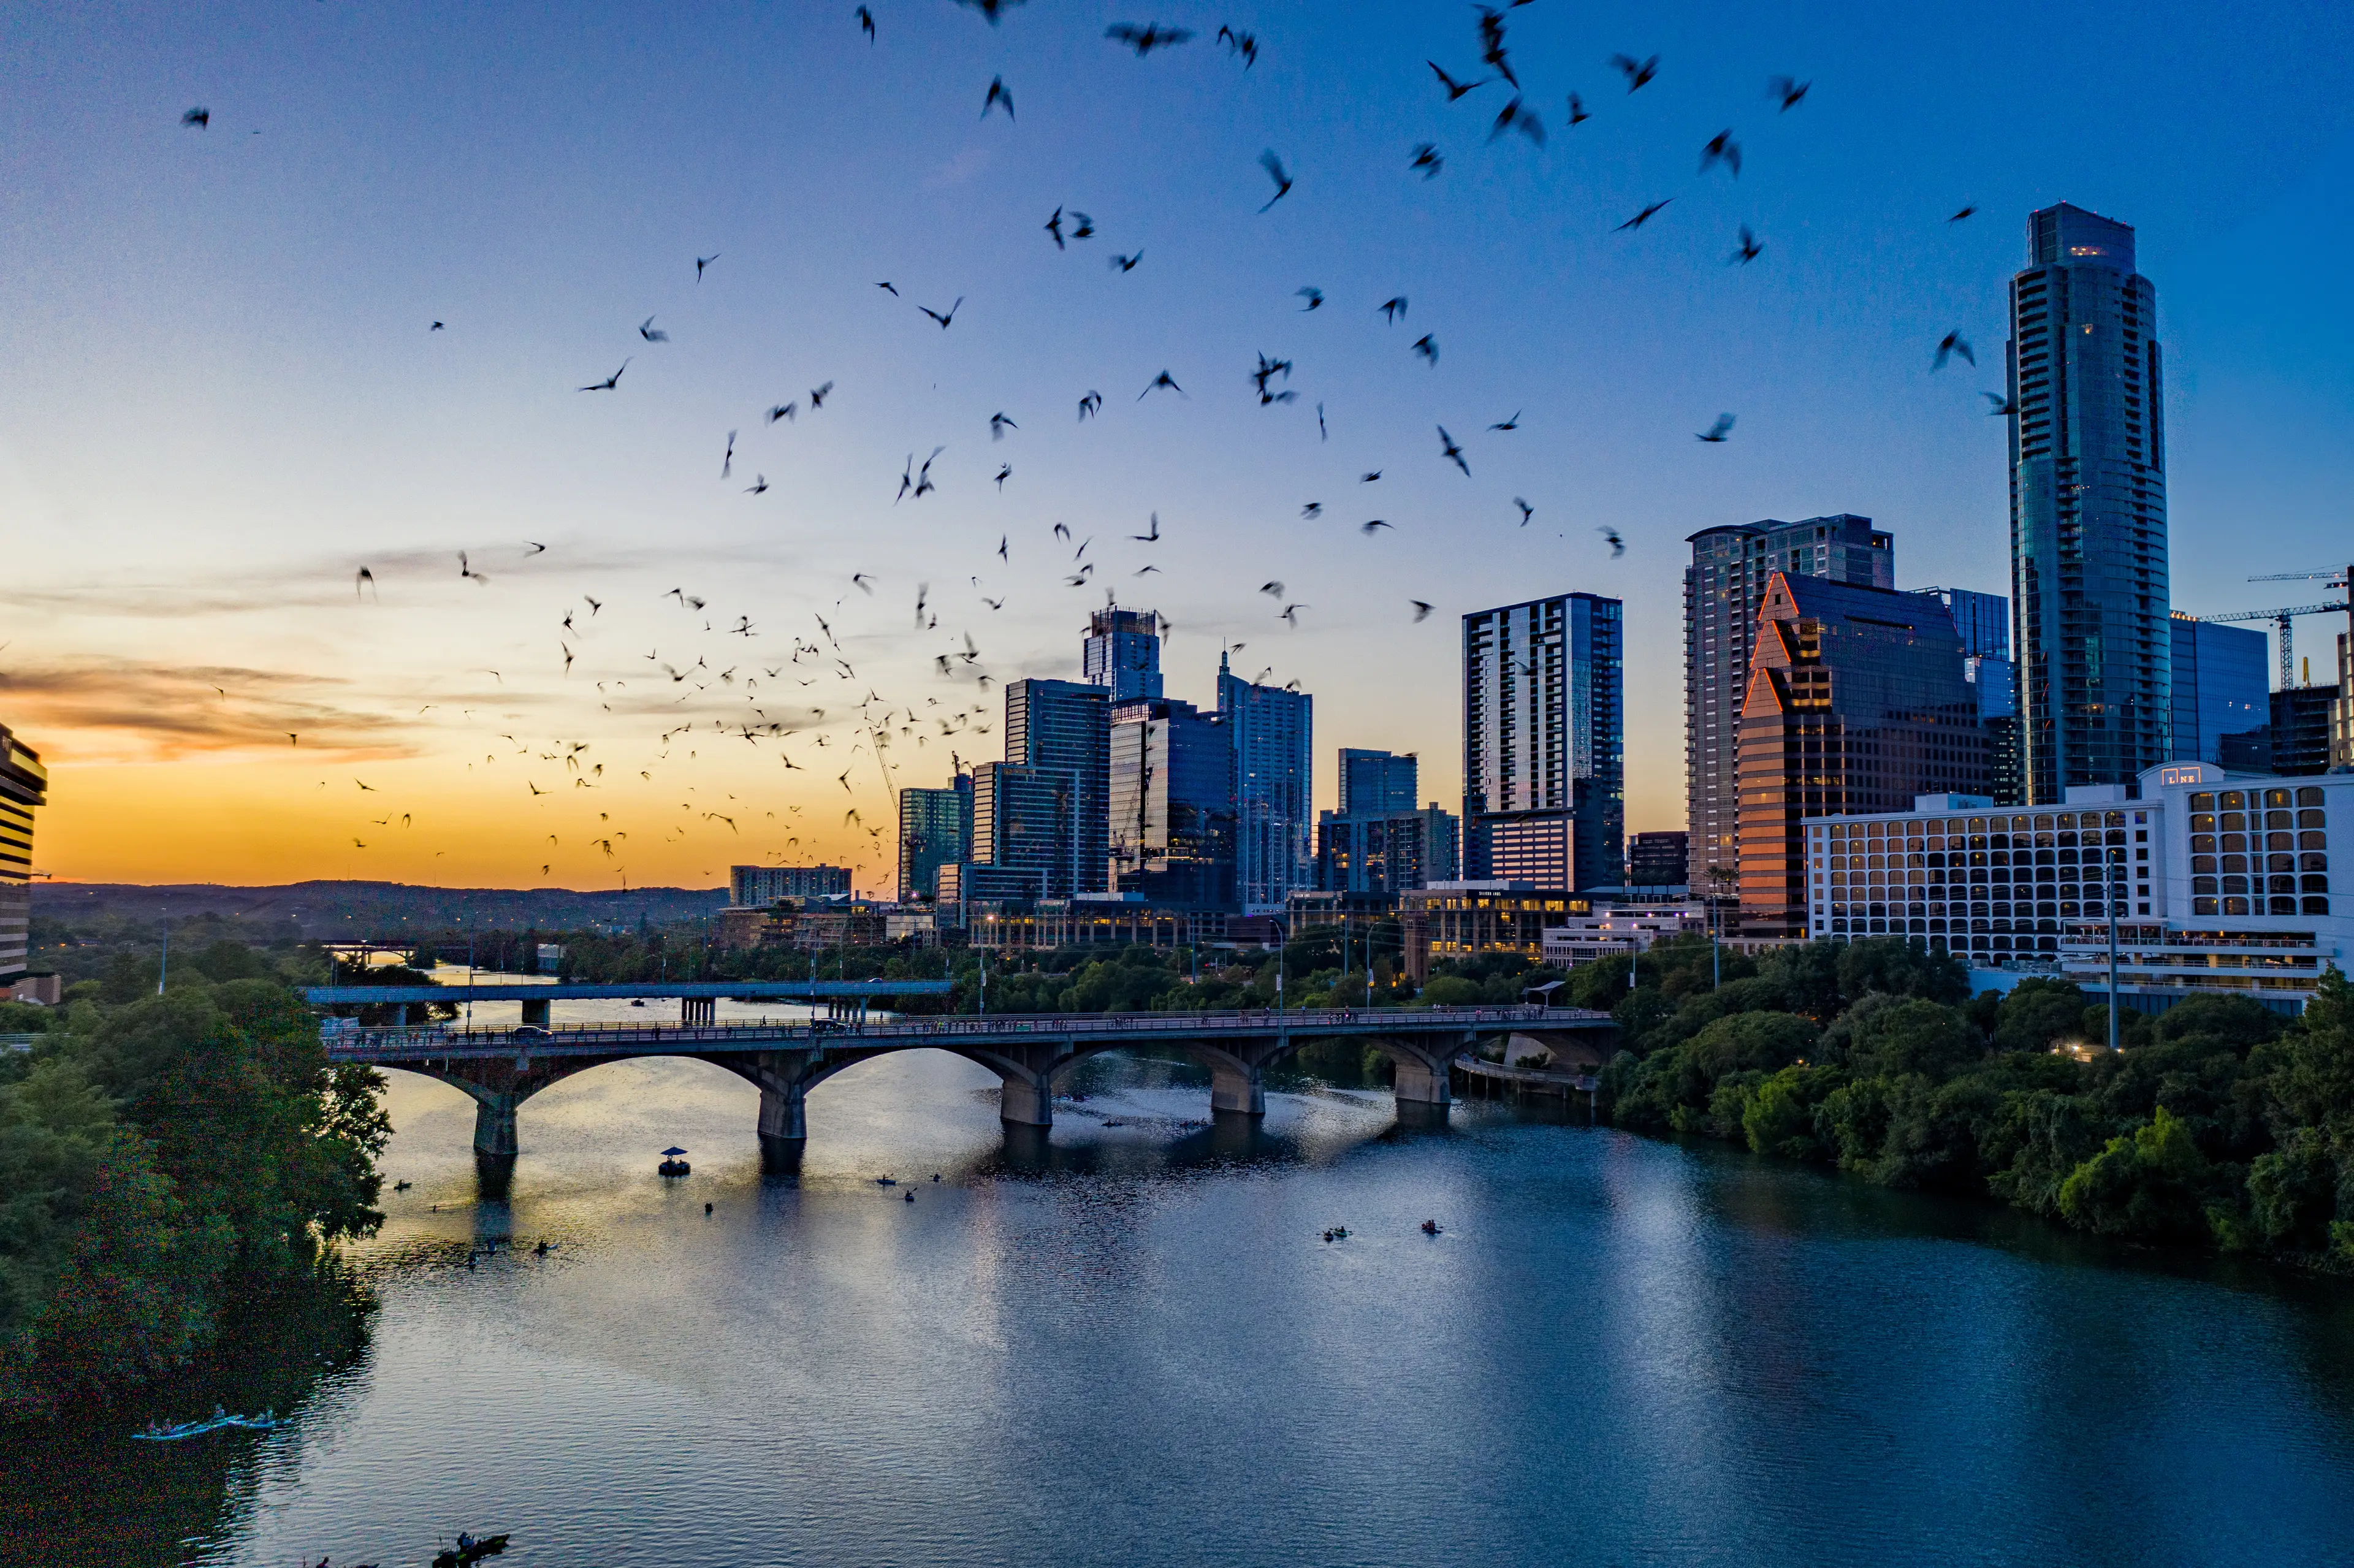 A colony of endemic bats flies over Austin